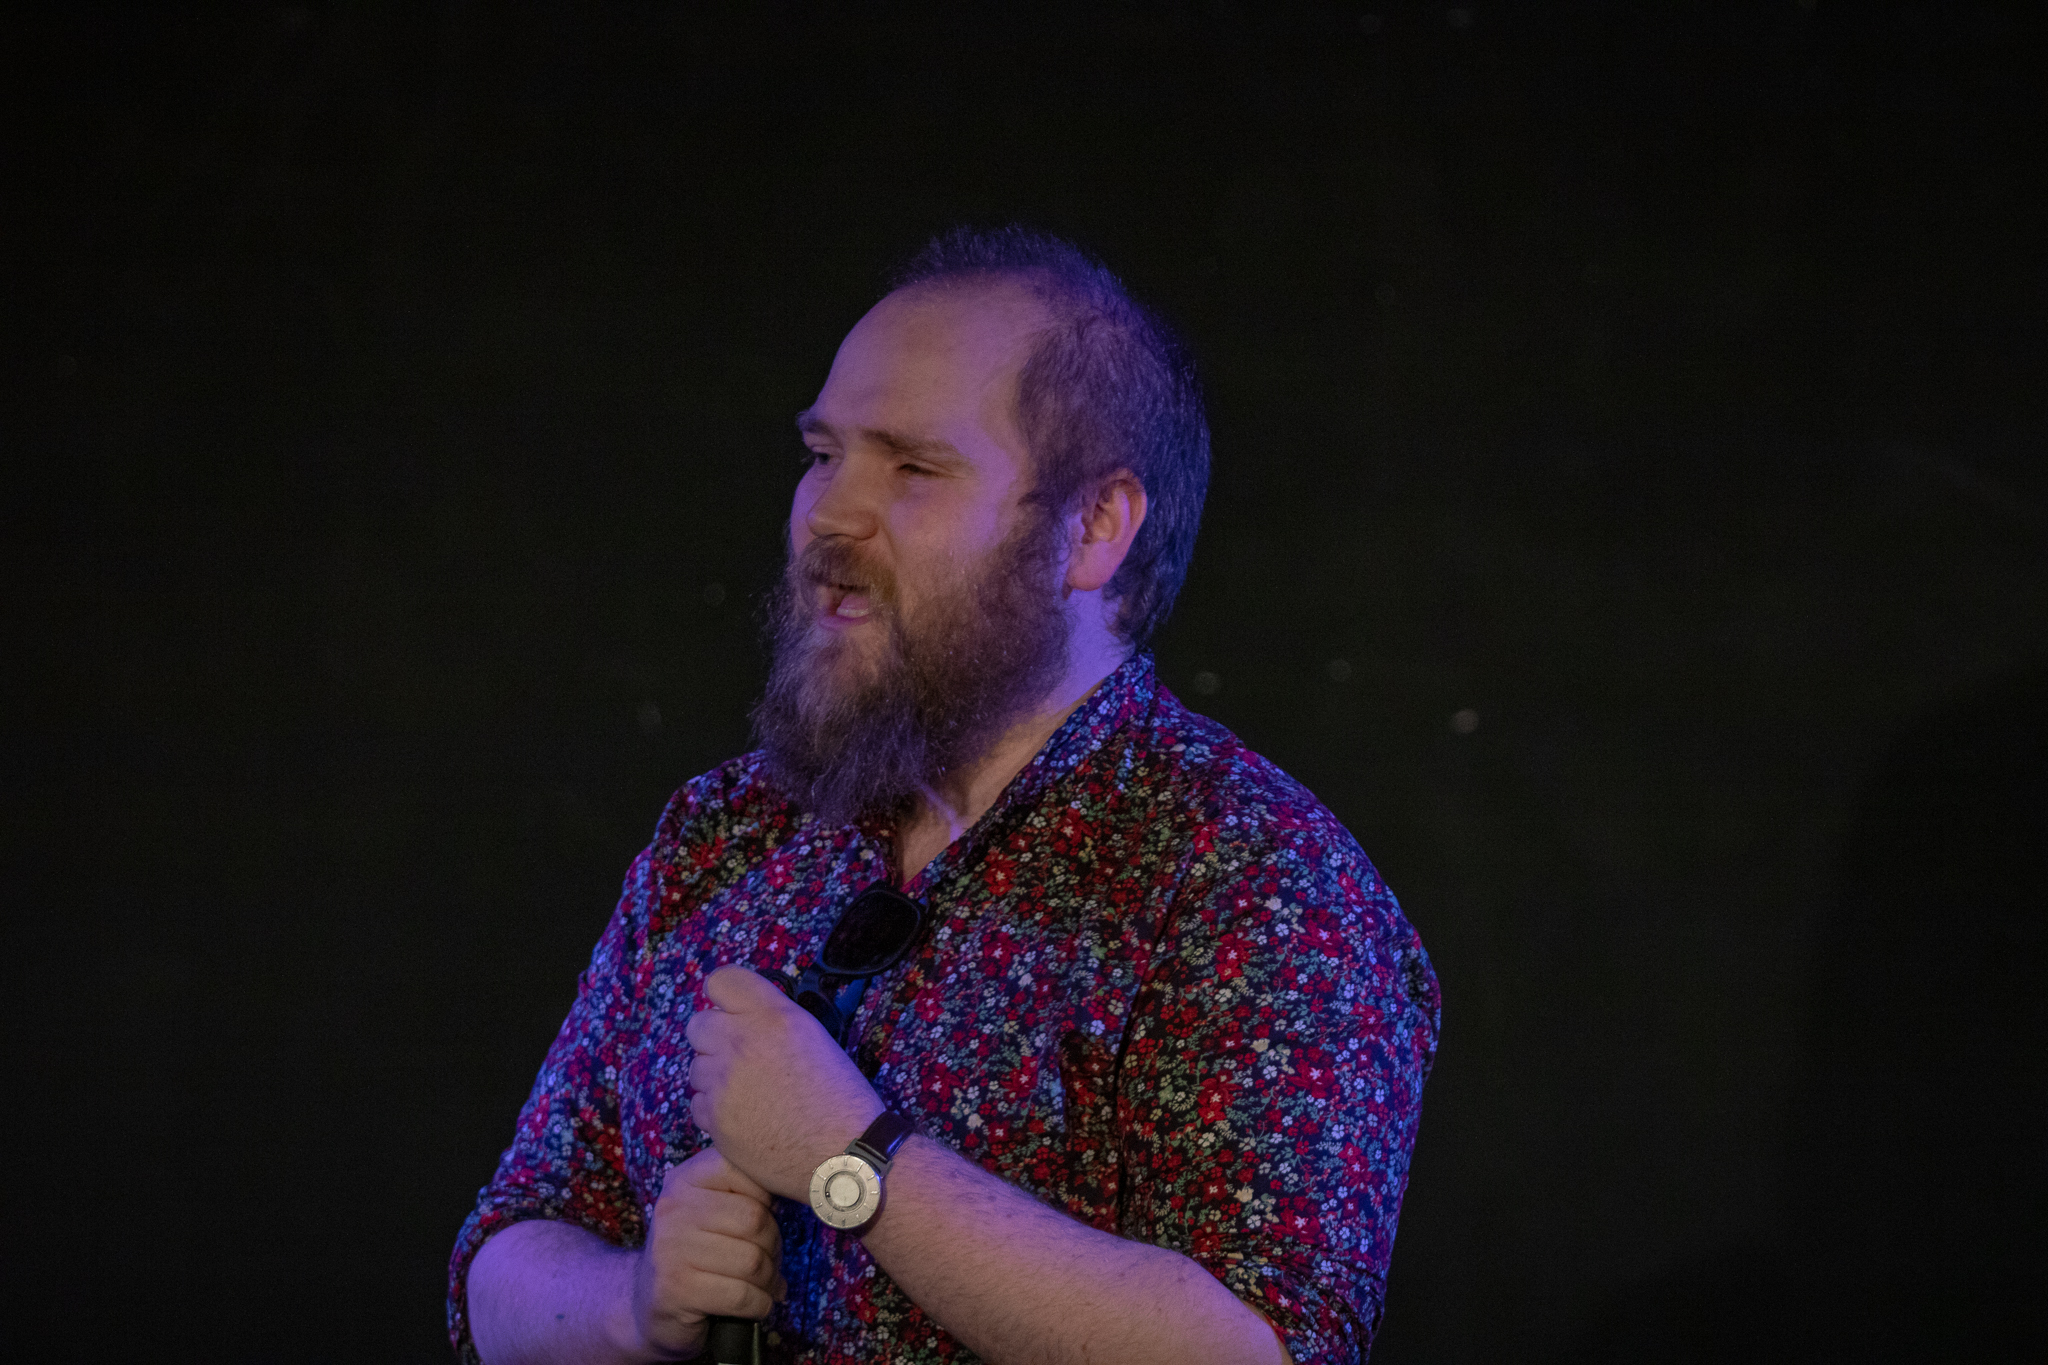 Ben Wilson, a white man, with short blonde hair and a beard. He wears a floral shirt and talks mid-sentence.